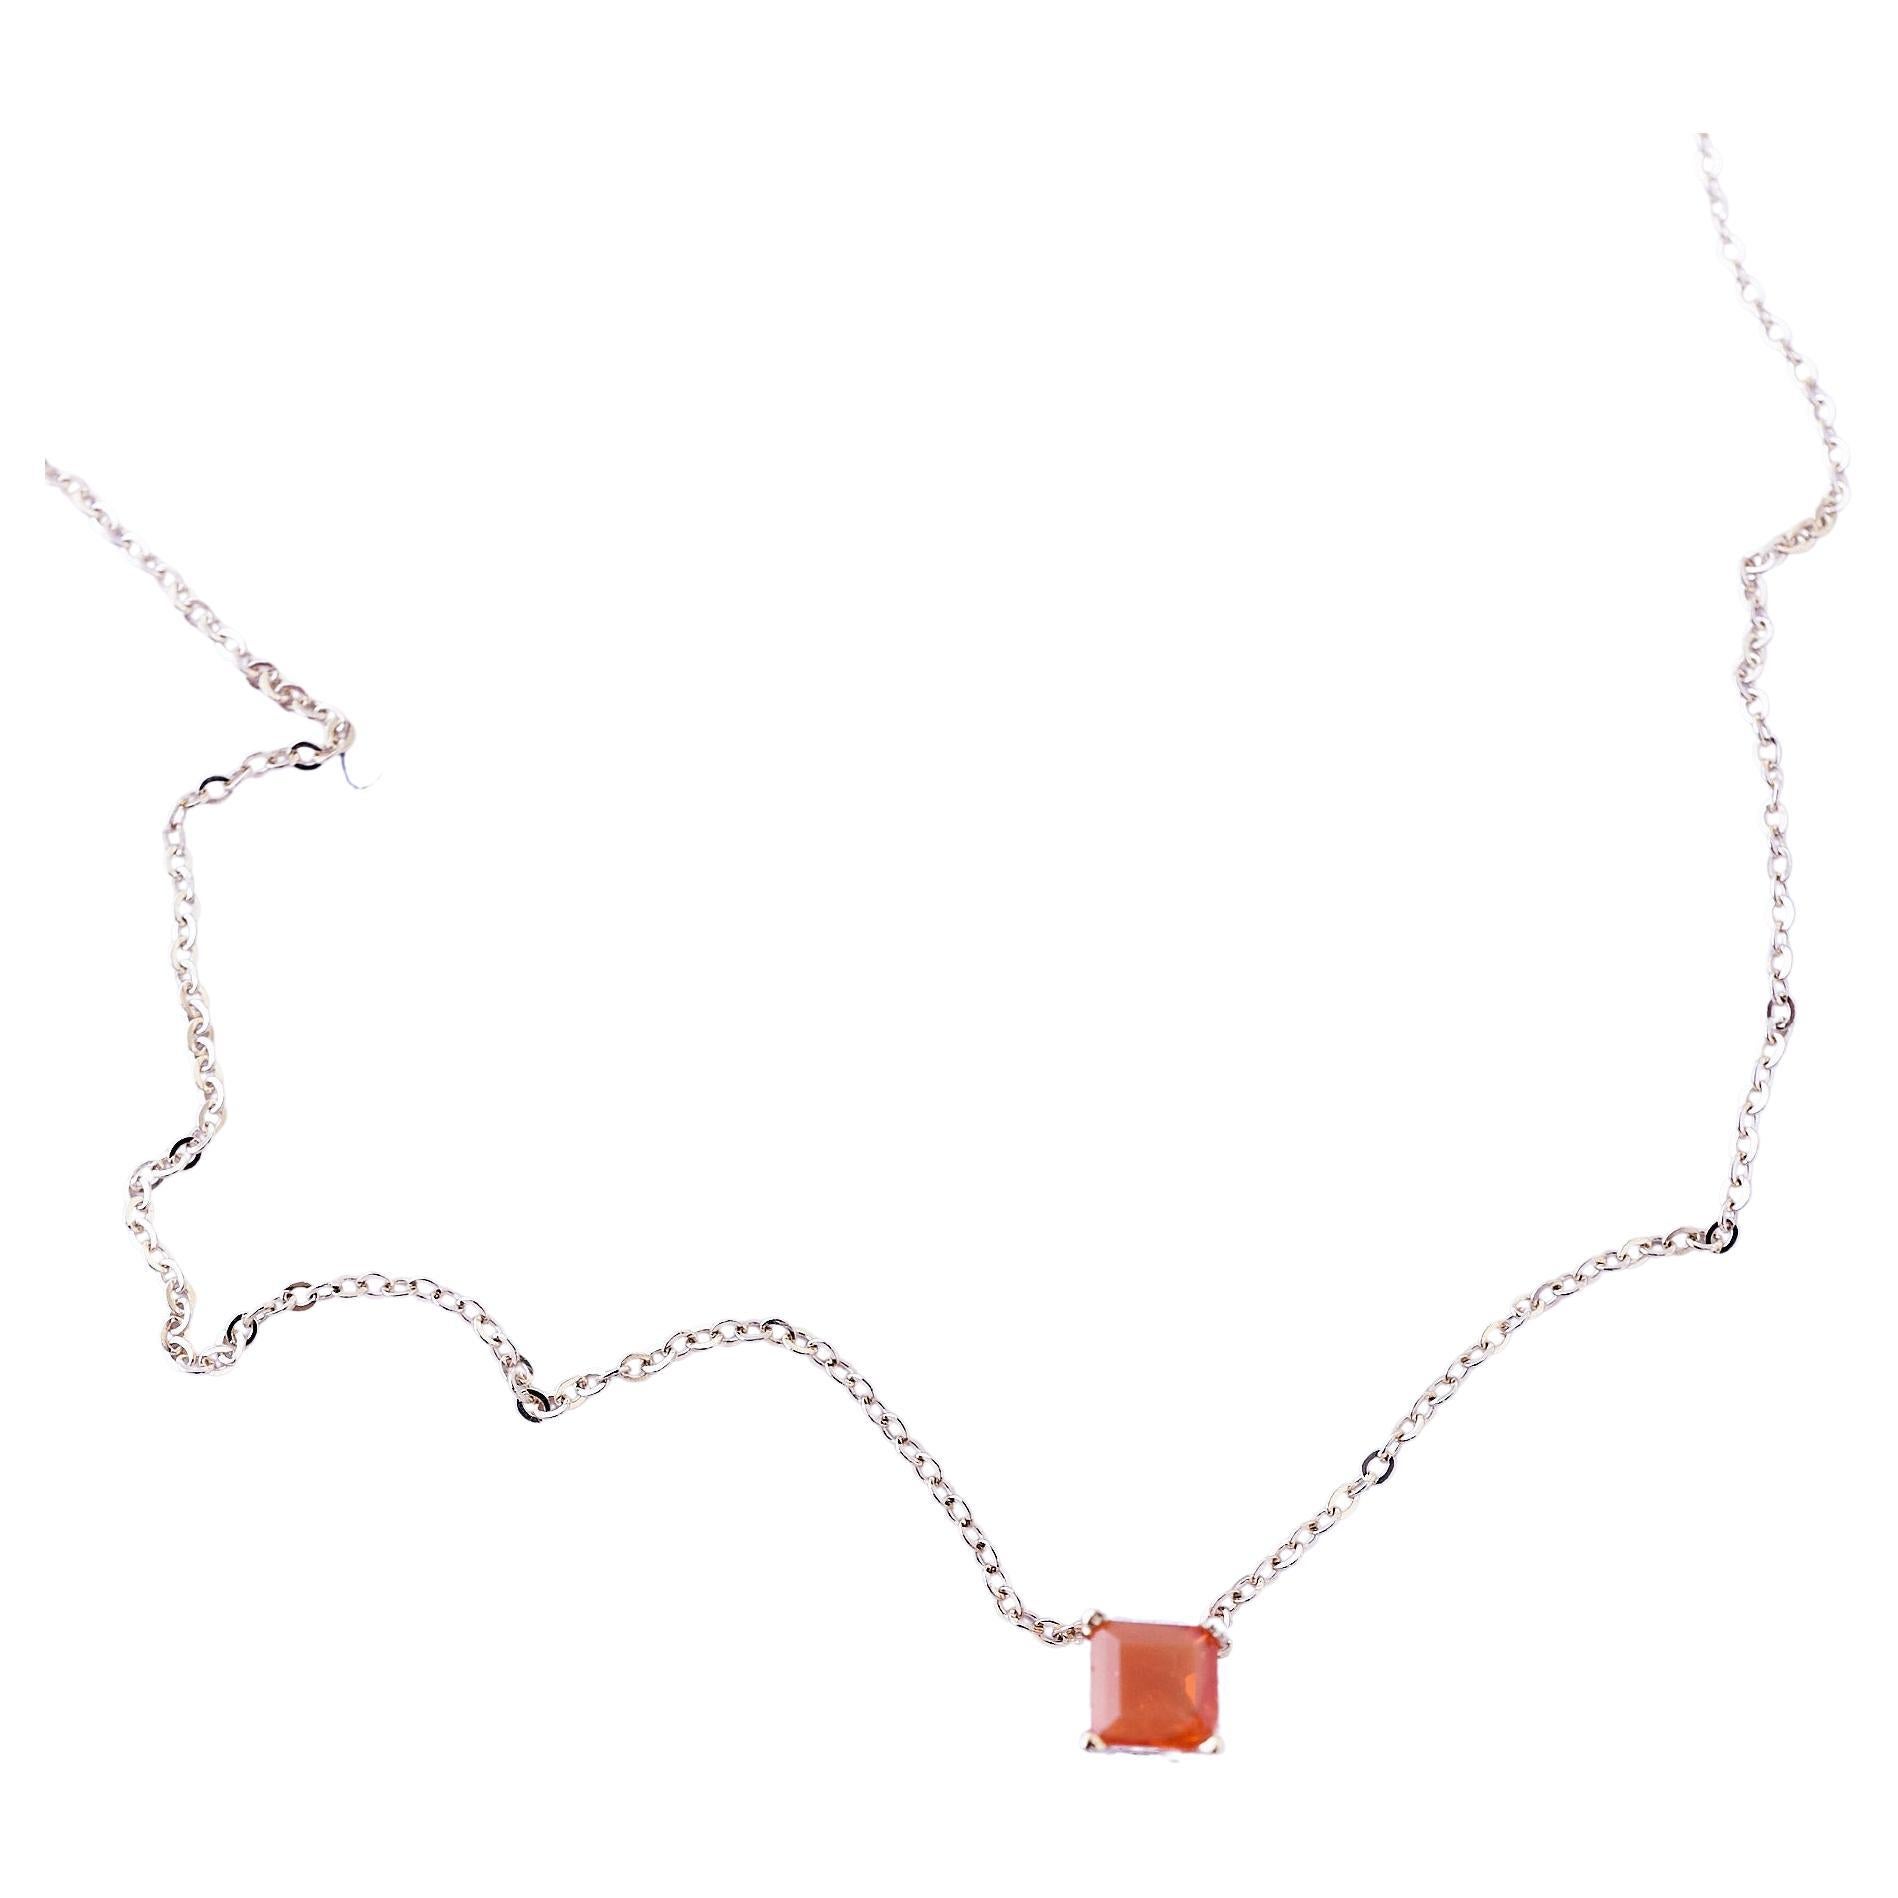 Square Fire Opal Gold Chain Necklace Choker J Dauphin For Sale